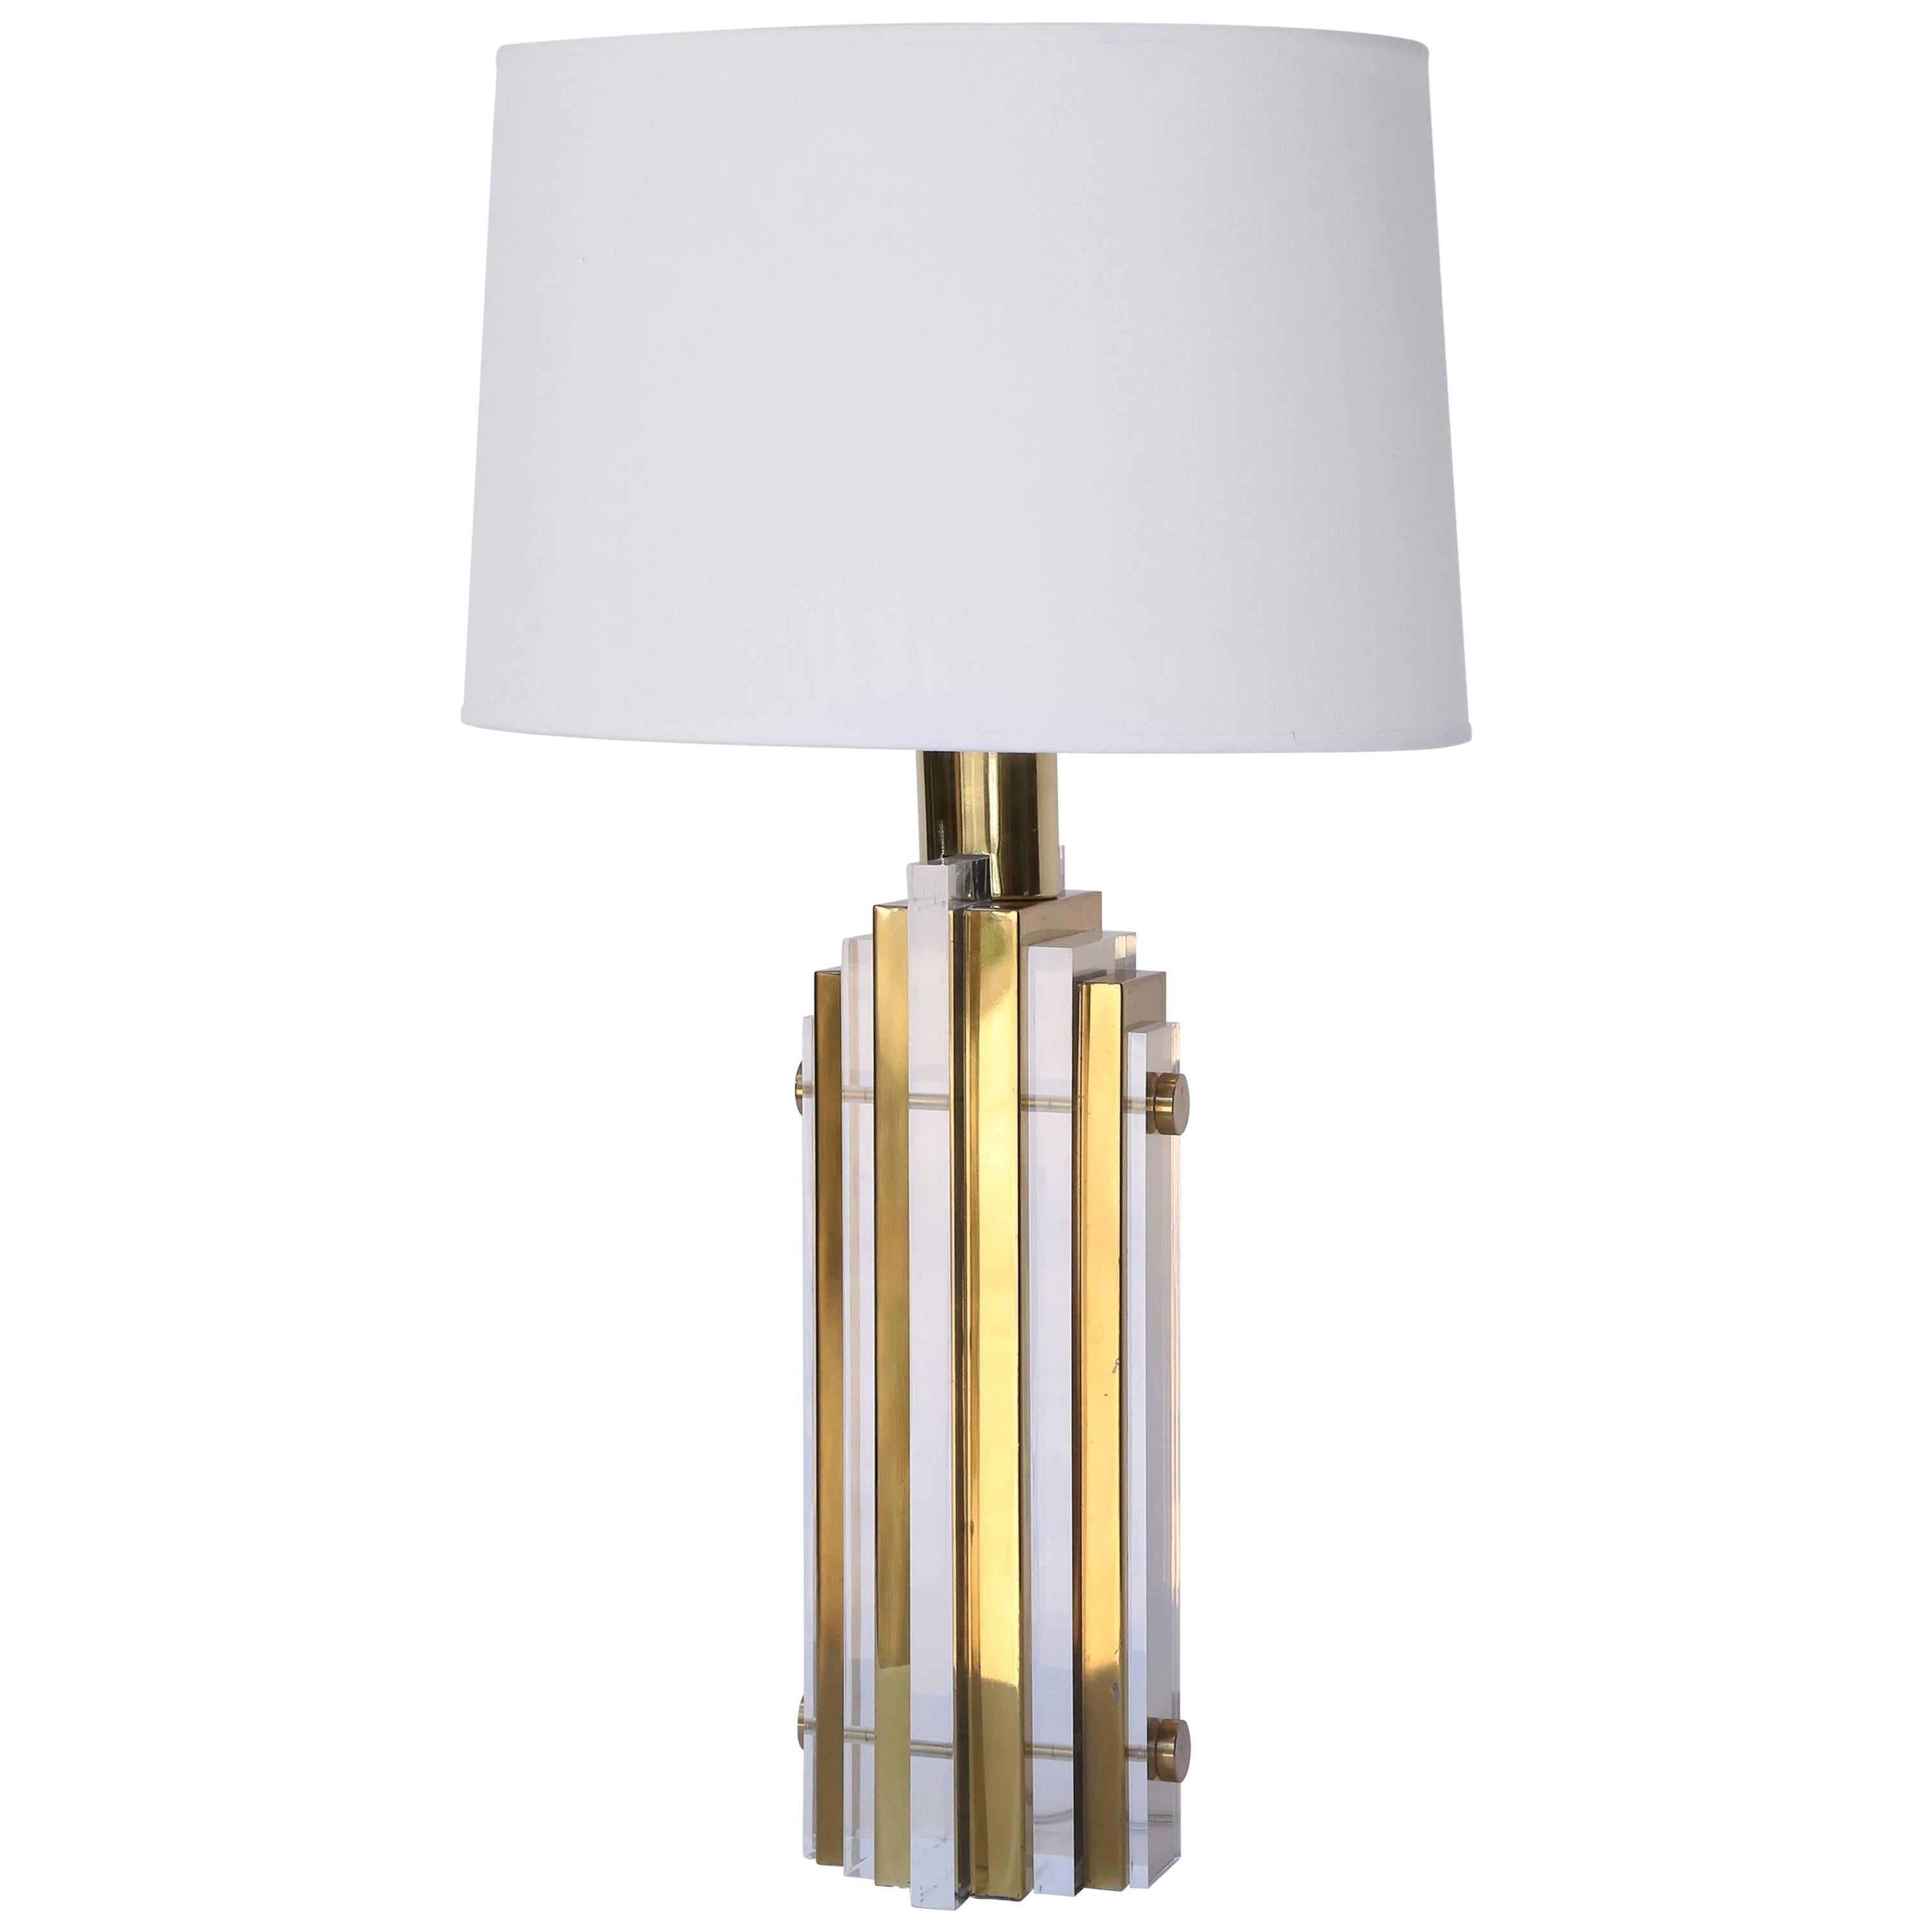 1970s Brass and Acrylic Lamp in the Style of Paul Evans